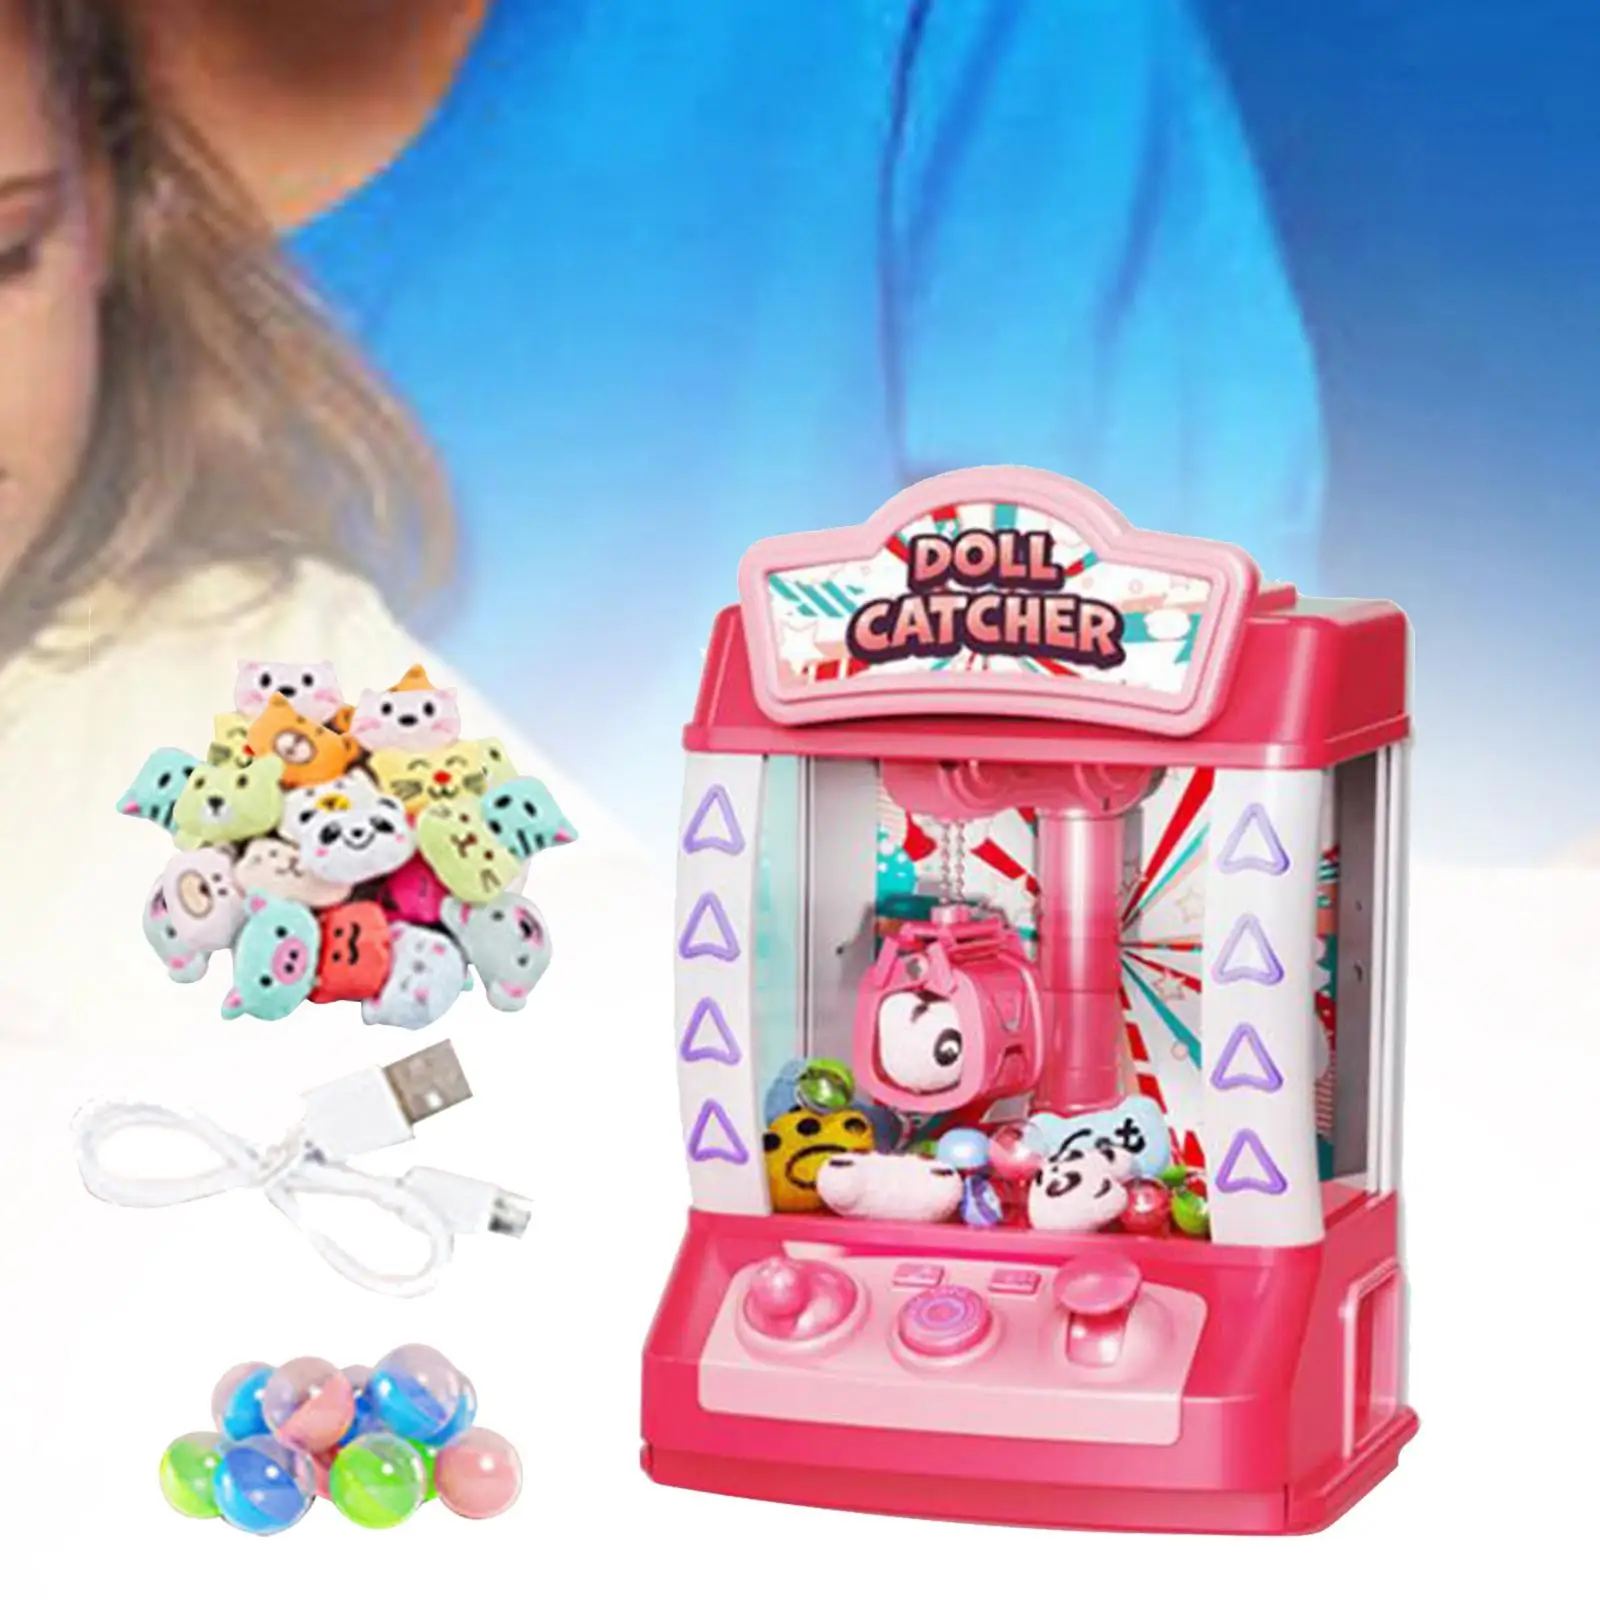 Claw Machine Valentine`s Day Gifts Arcade Candy Capsule Claw Game Prizes Toy for Toddlers Adults Girls Boys Children Home